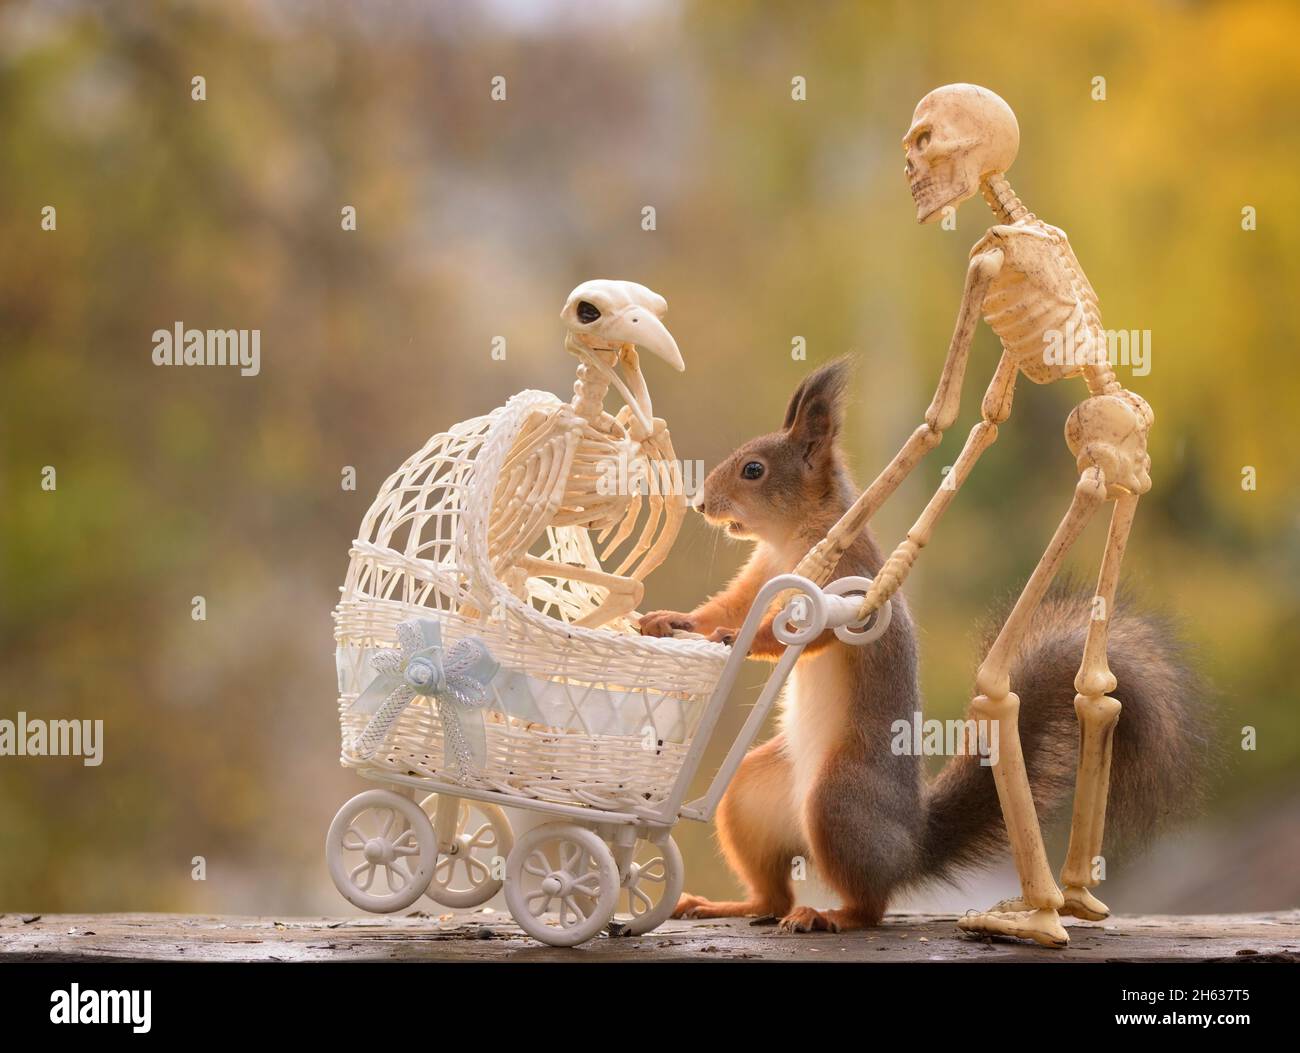 skeleton bird and red squirrel with a stroller and a skeleton Stock Photo